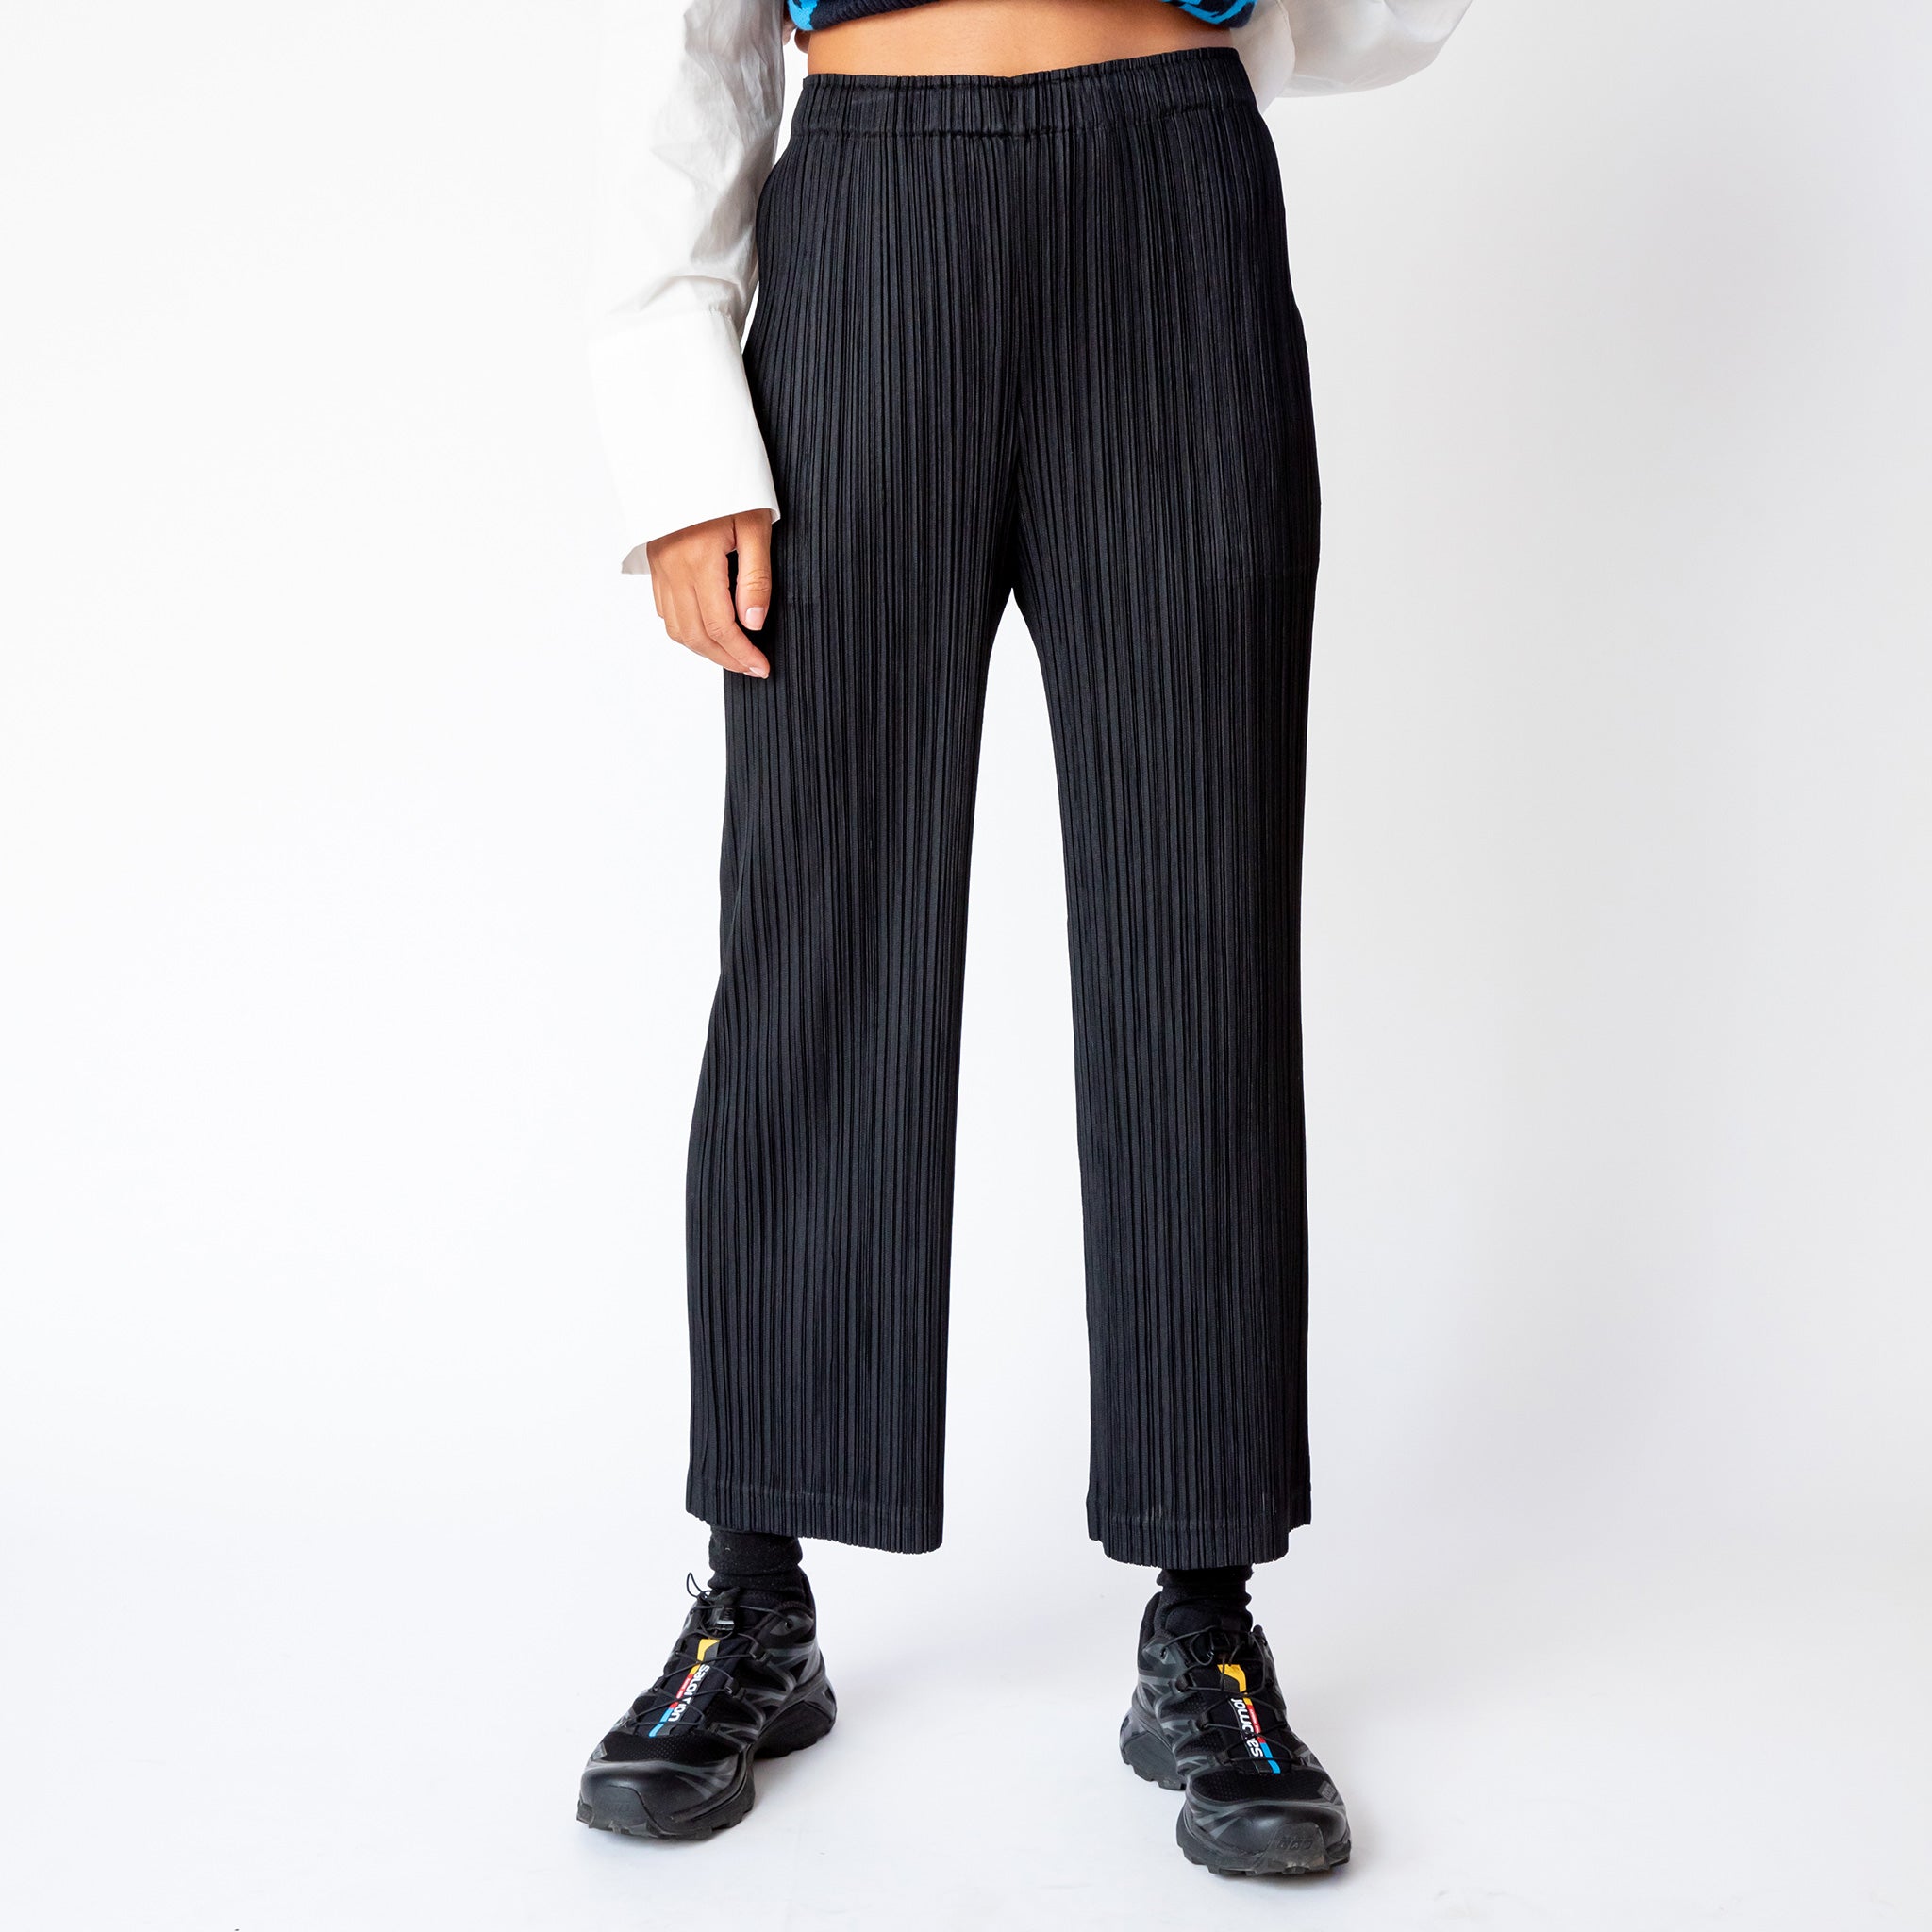 A model wears the black Thicker Bottoms 2 pleated trousers by Pleats Please, paired with black sneakers.